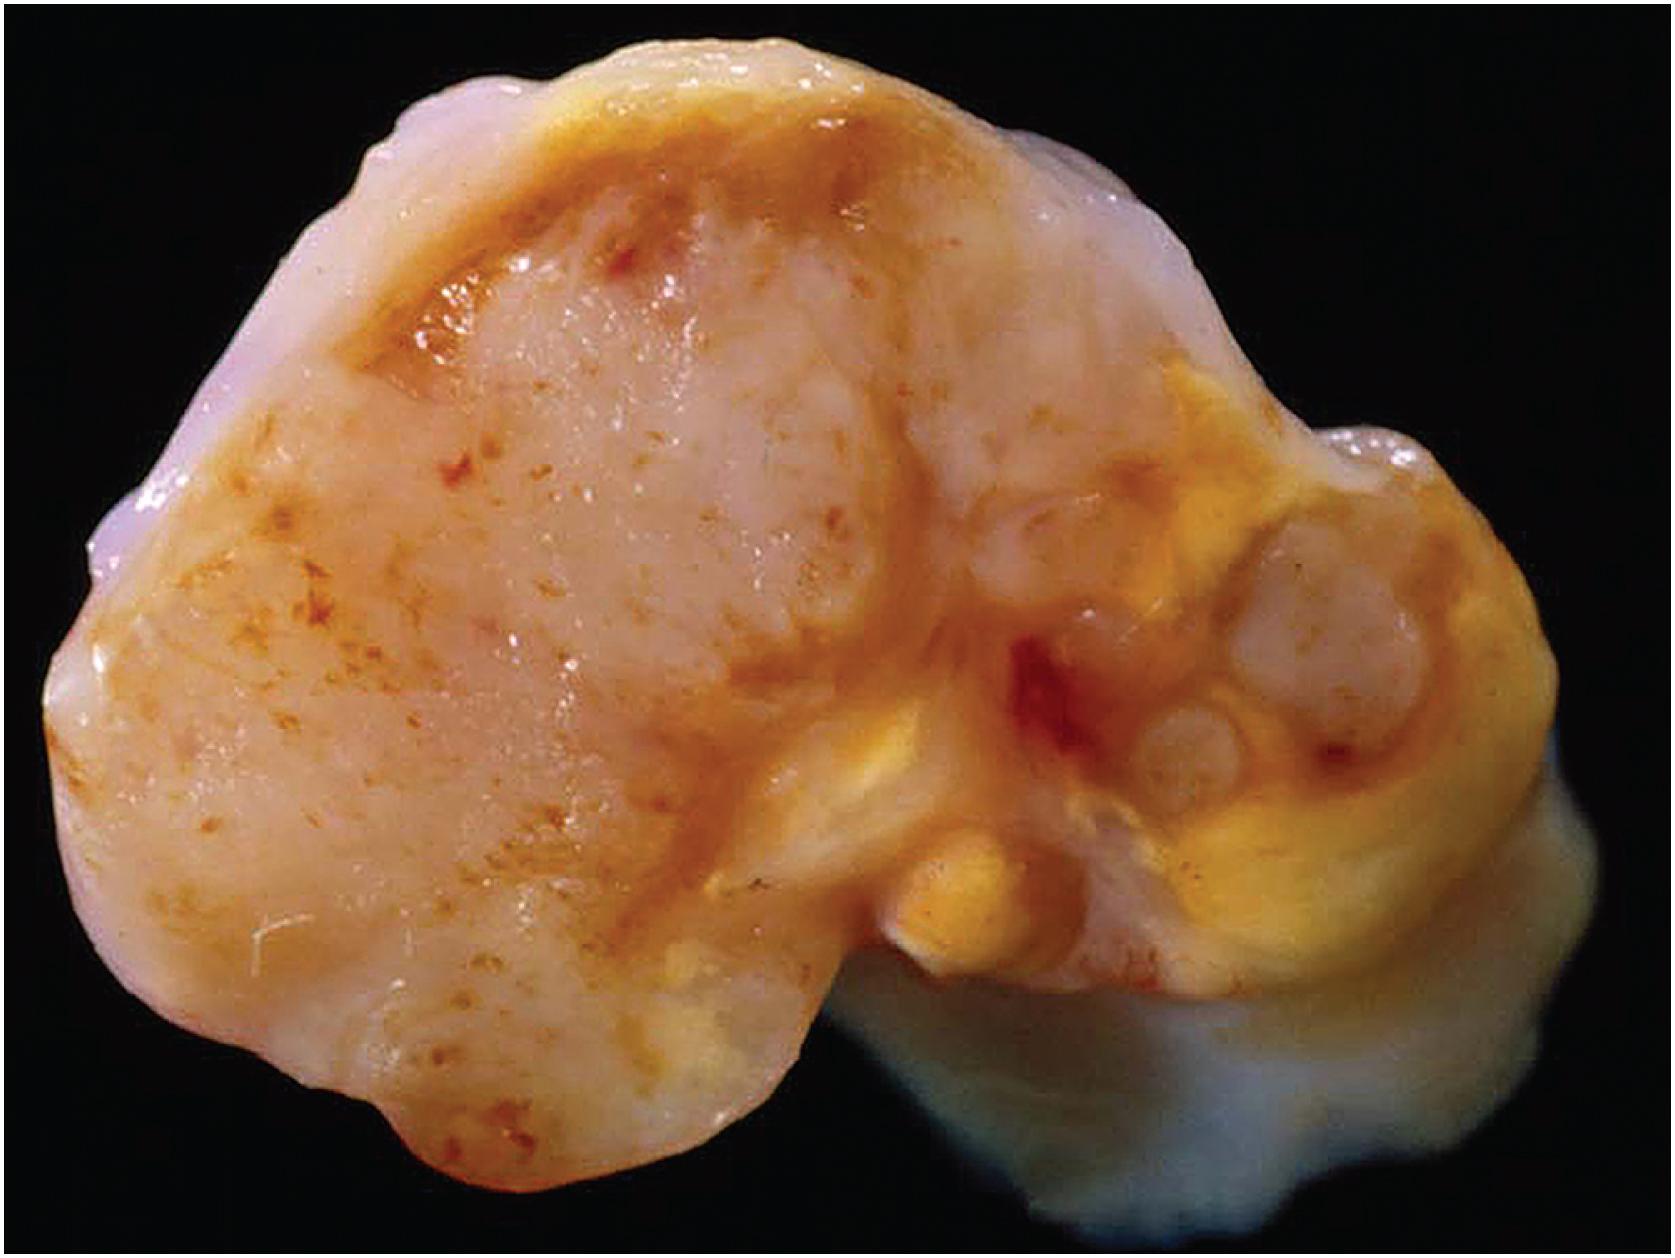 Fig. 13.10, Localized tenosynovial giant cell tumor. Cross sections showing brown, grey, and yellow areas.